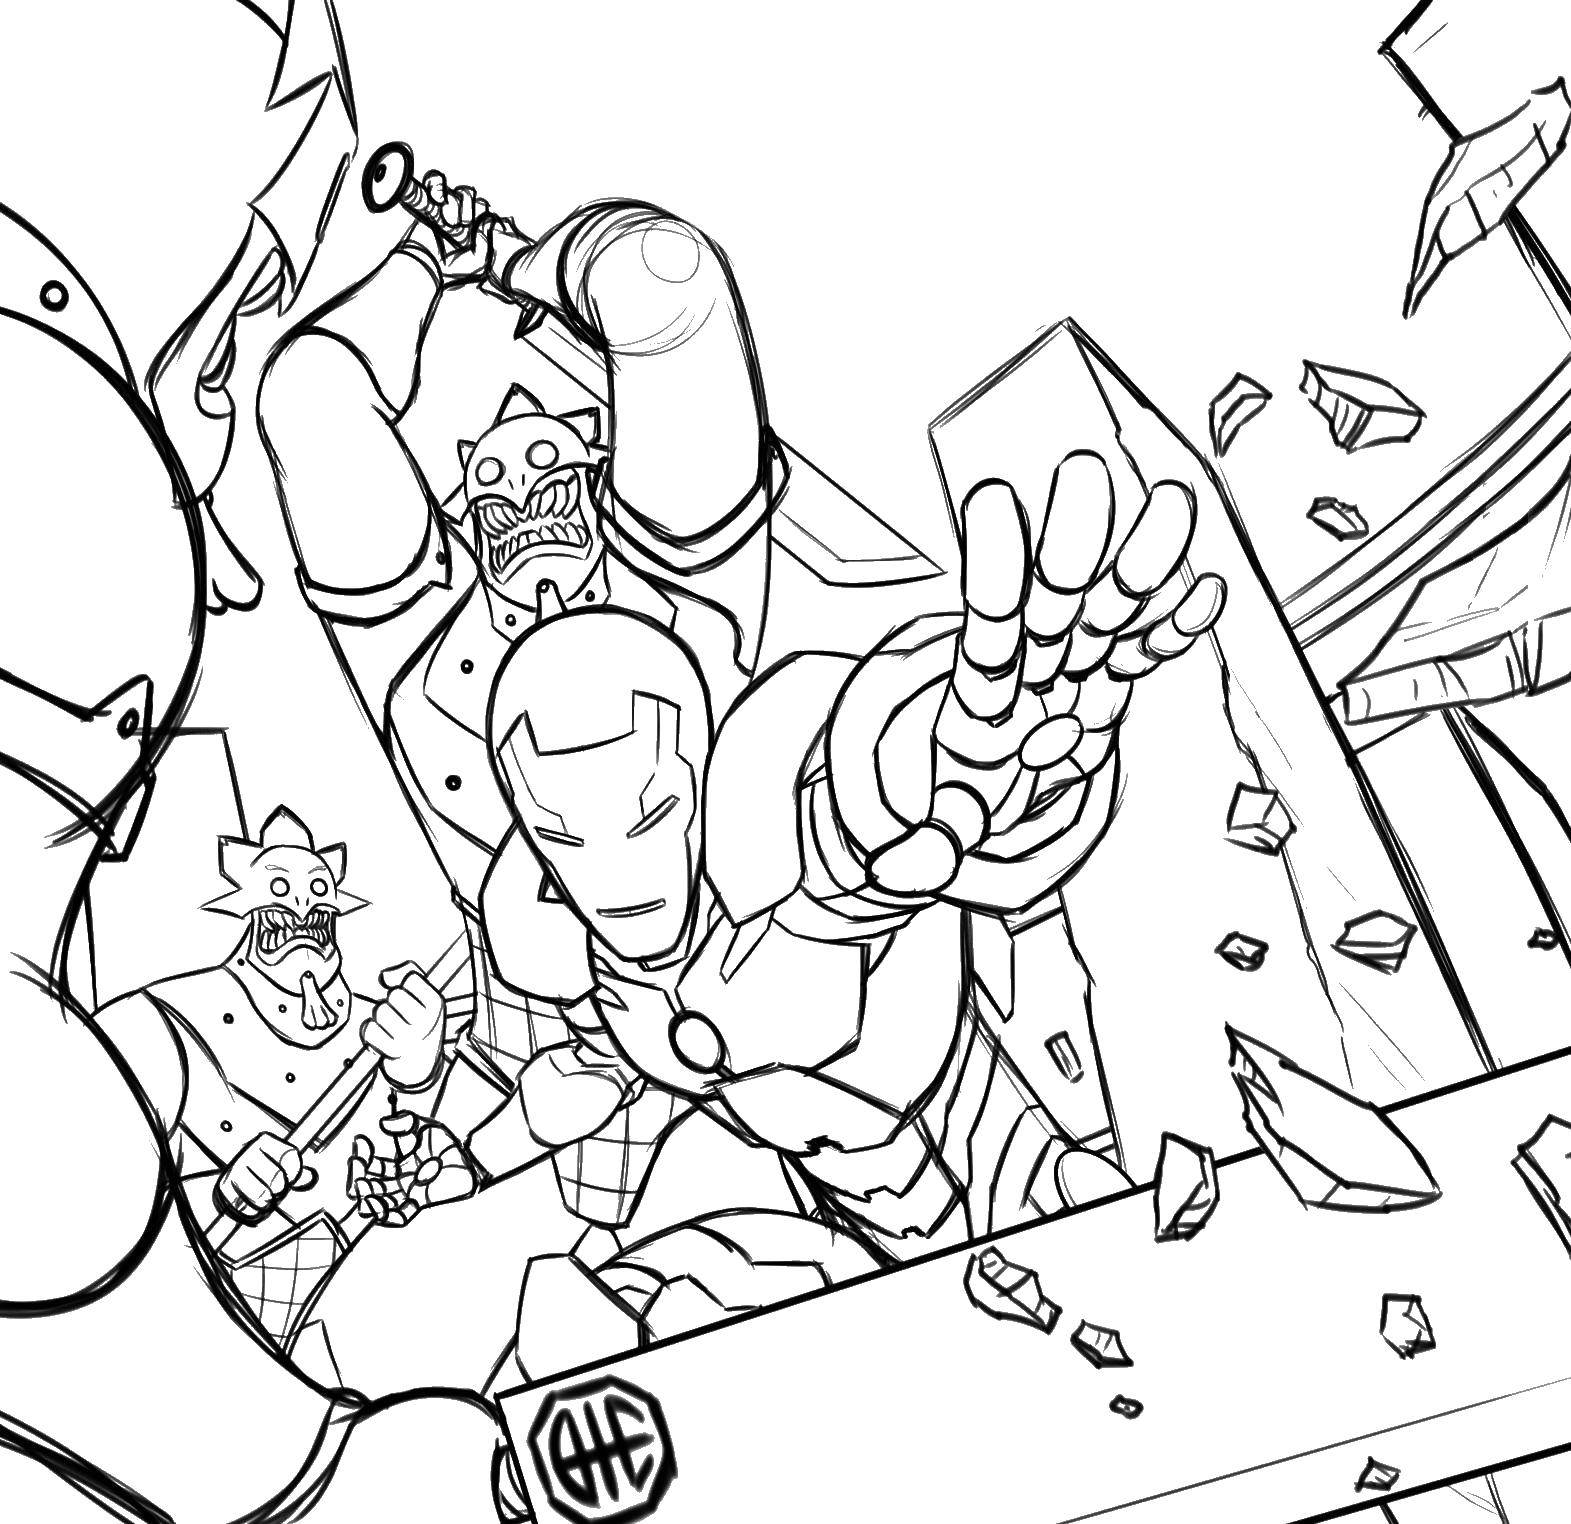 Coloring Iron man in battle. Category iron man. Tags:  iron man.